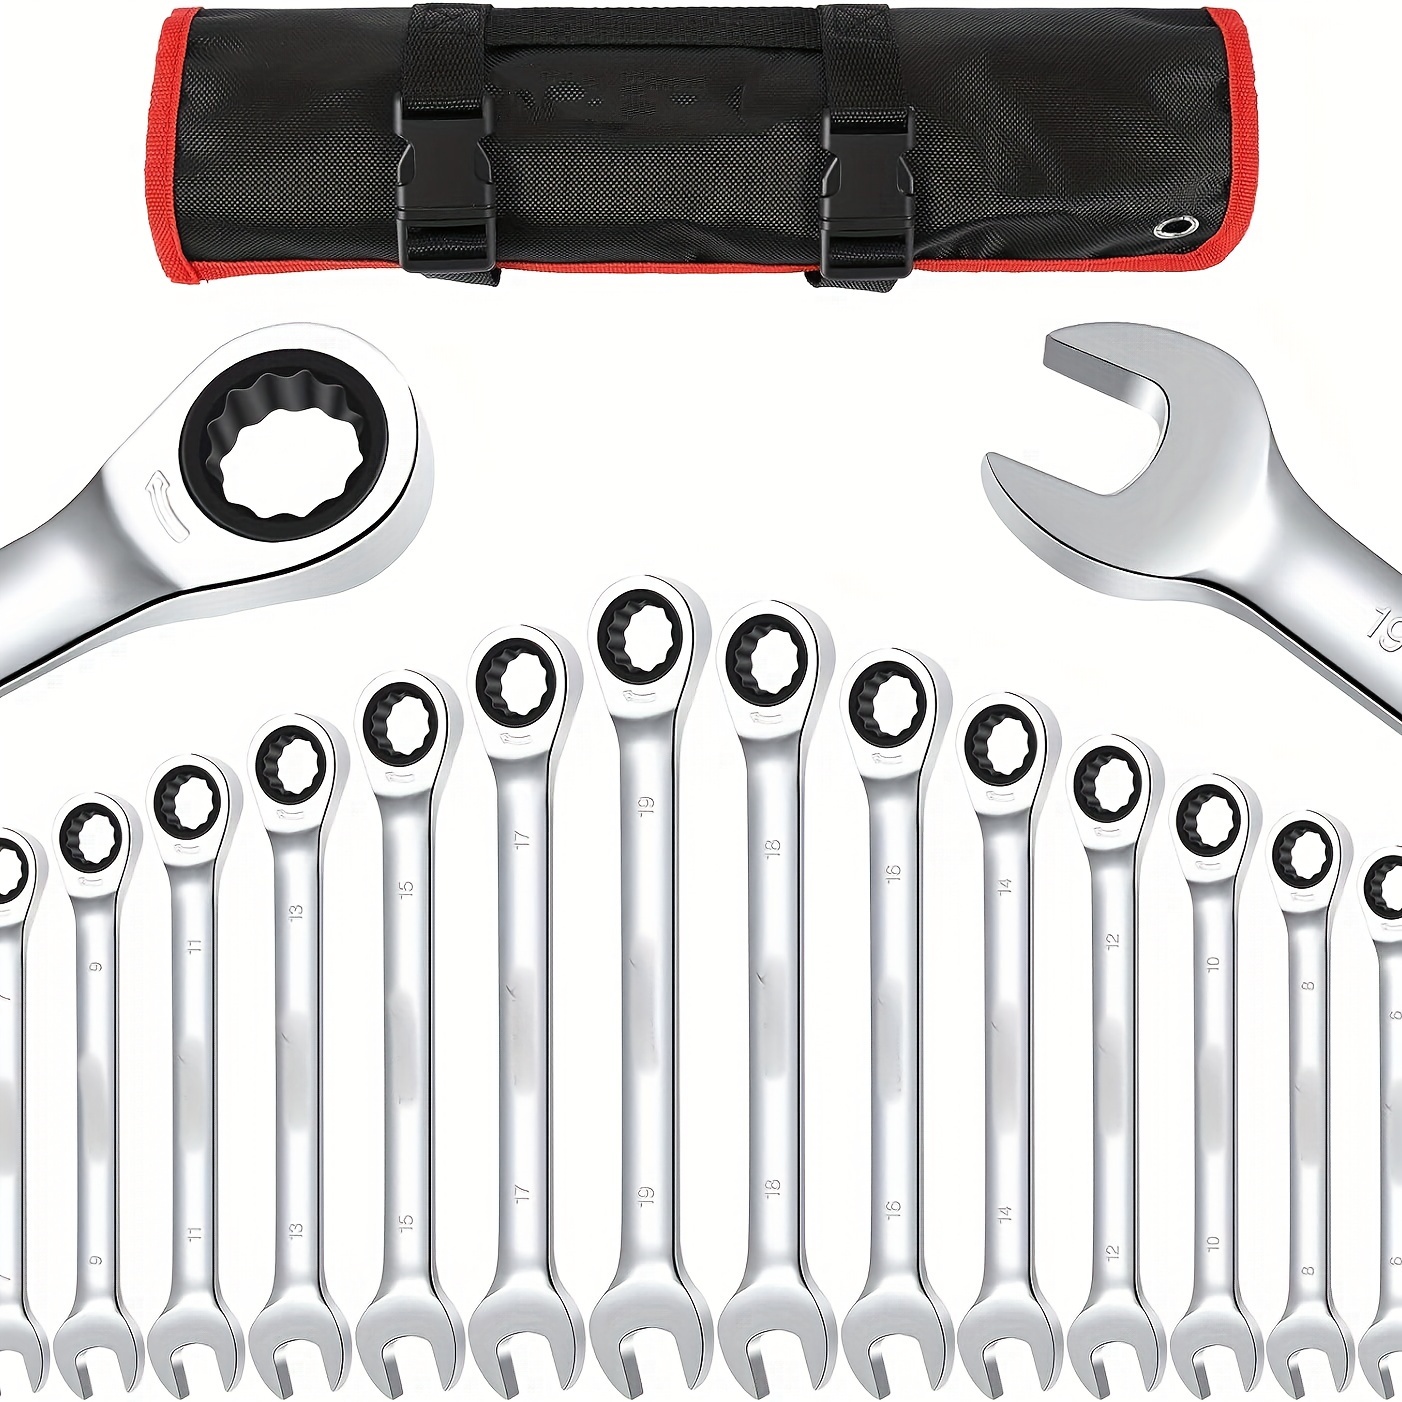 

14pcs Wrench Set, Ratcheting Wrench Set, Metric 6-19mm, Fixed Head Ratcheting Combination Wrenchs, Chrome Vanadium Steel With Storage Bag For Truck/garage Projects, Etc.